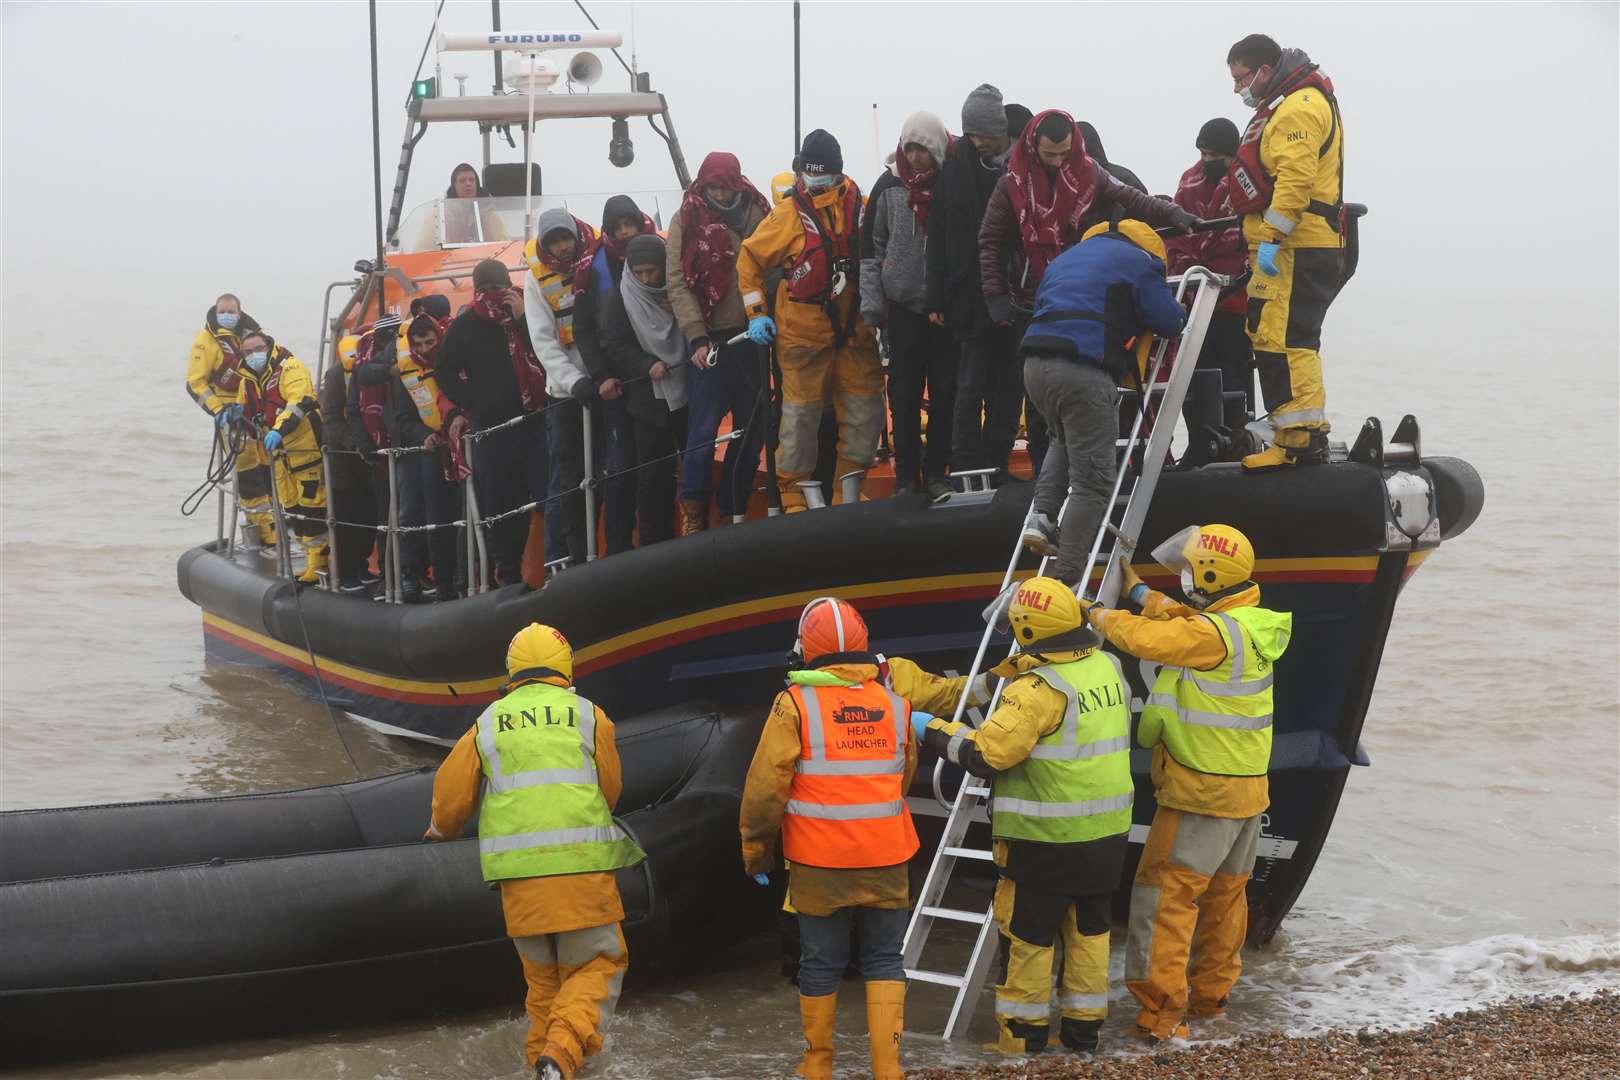 A rescue operation was launched after five men were reported to be in the sea. Picture: UKNIP